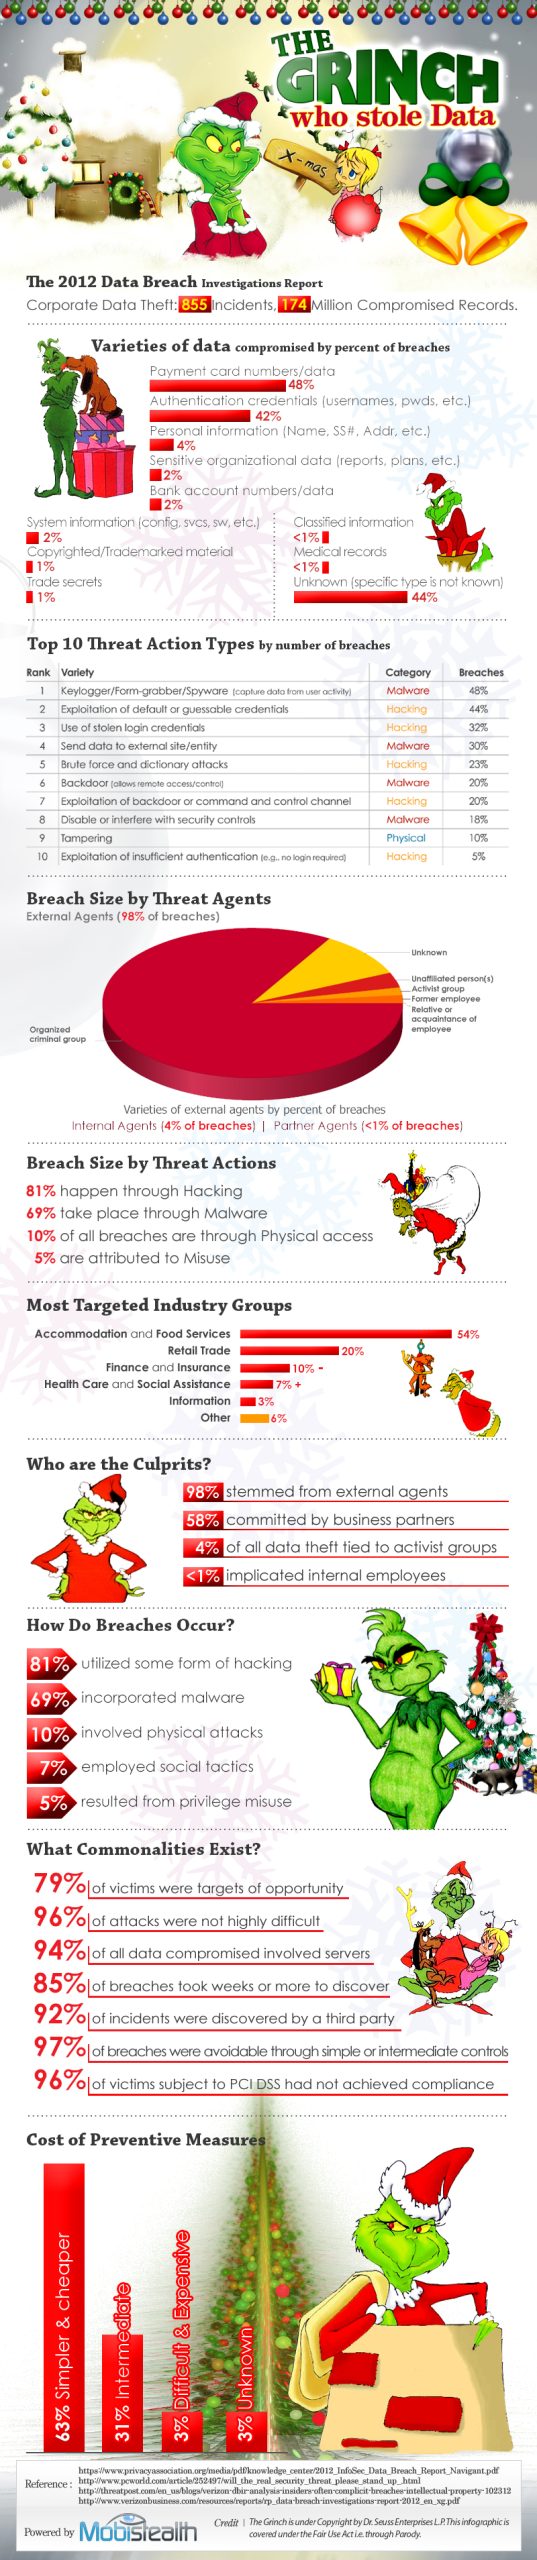 INFOGRAPHIC: The Grinch Who Stole Data